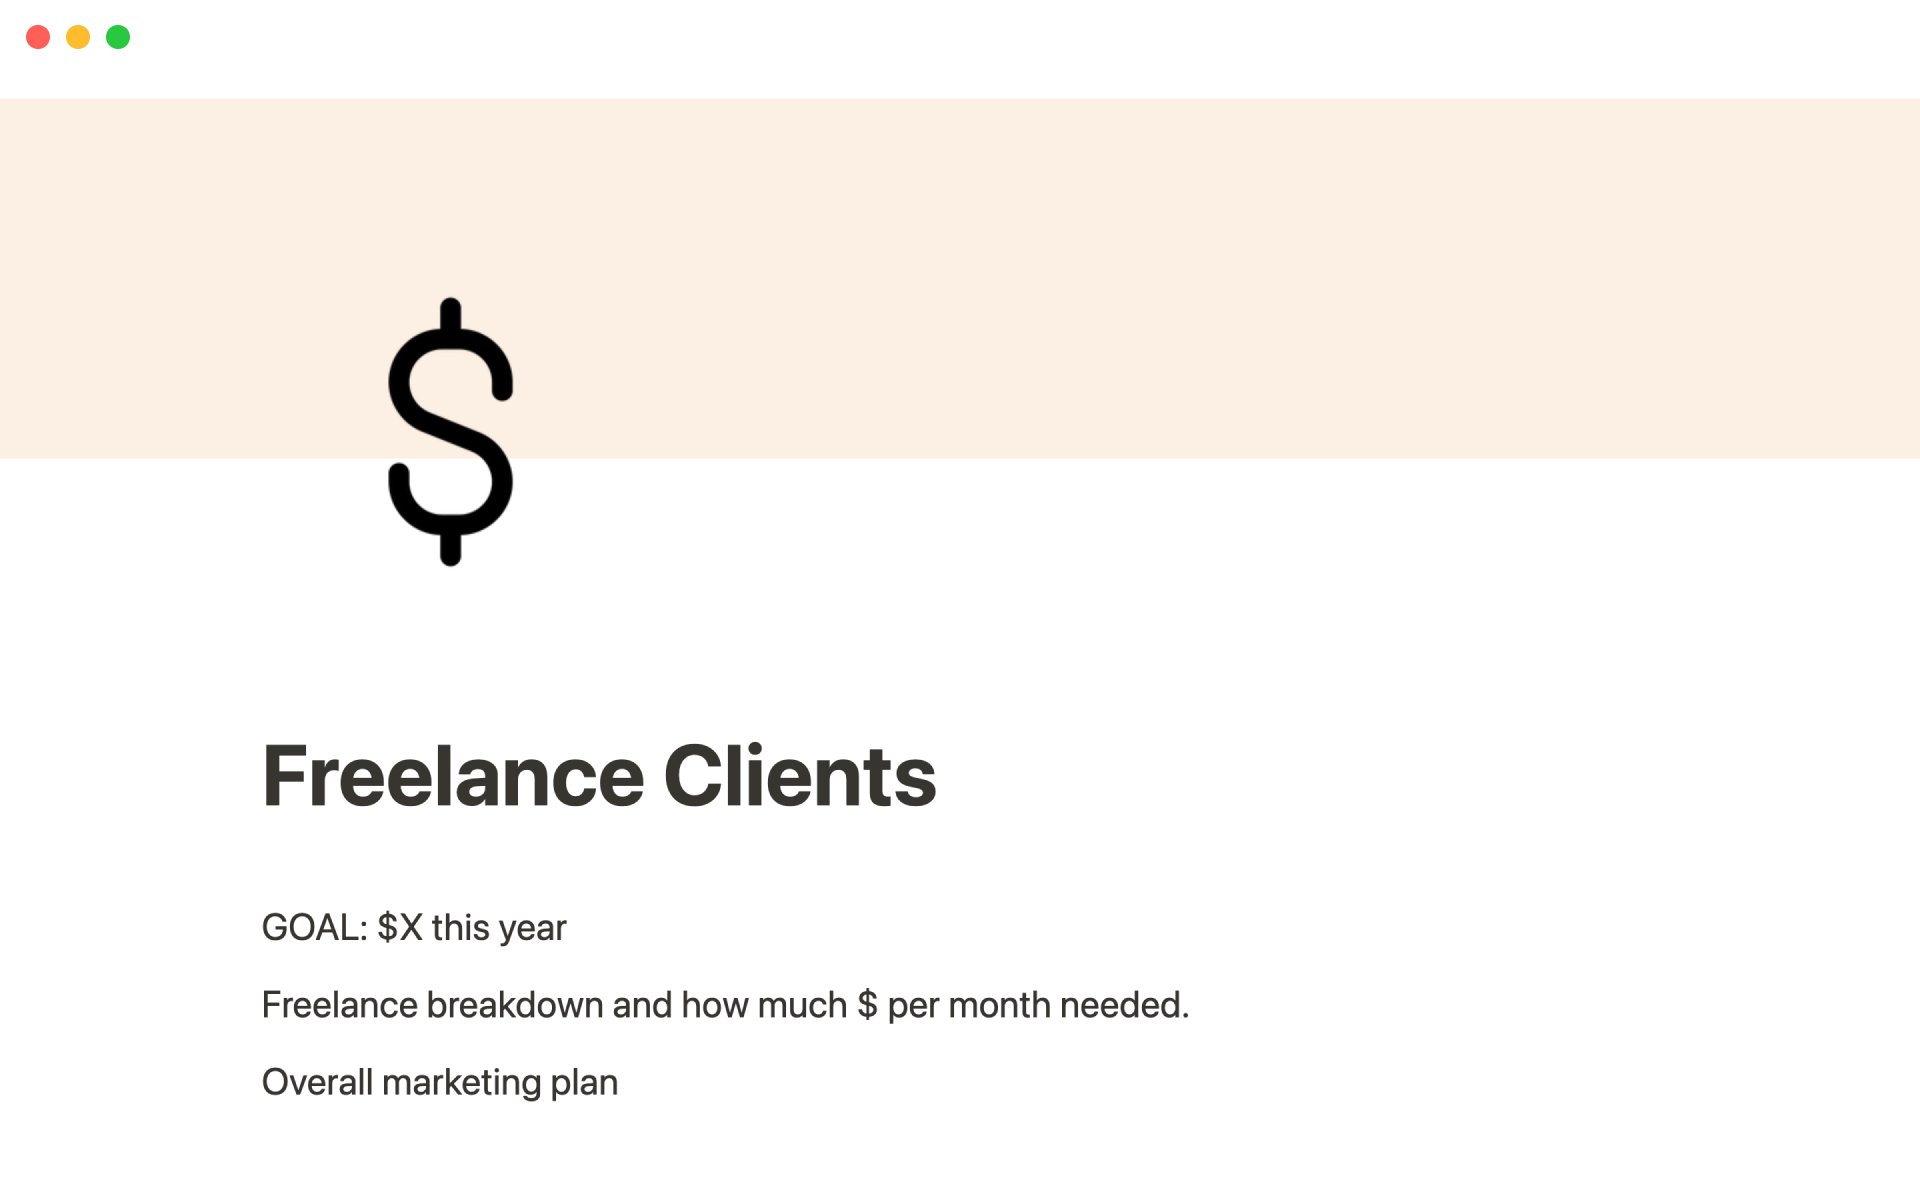 The desktop image for the Freelance client template